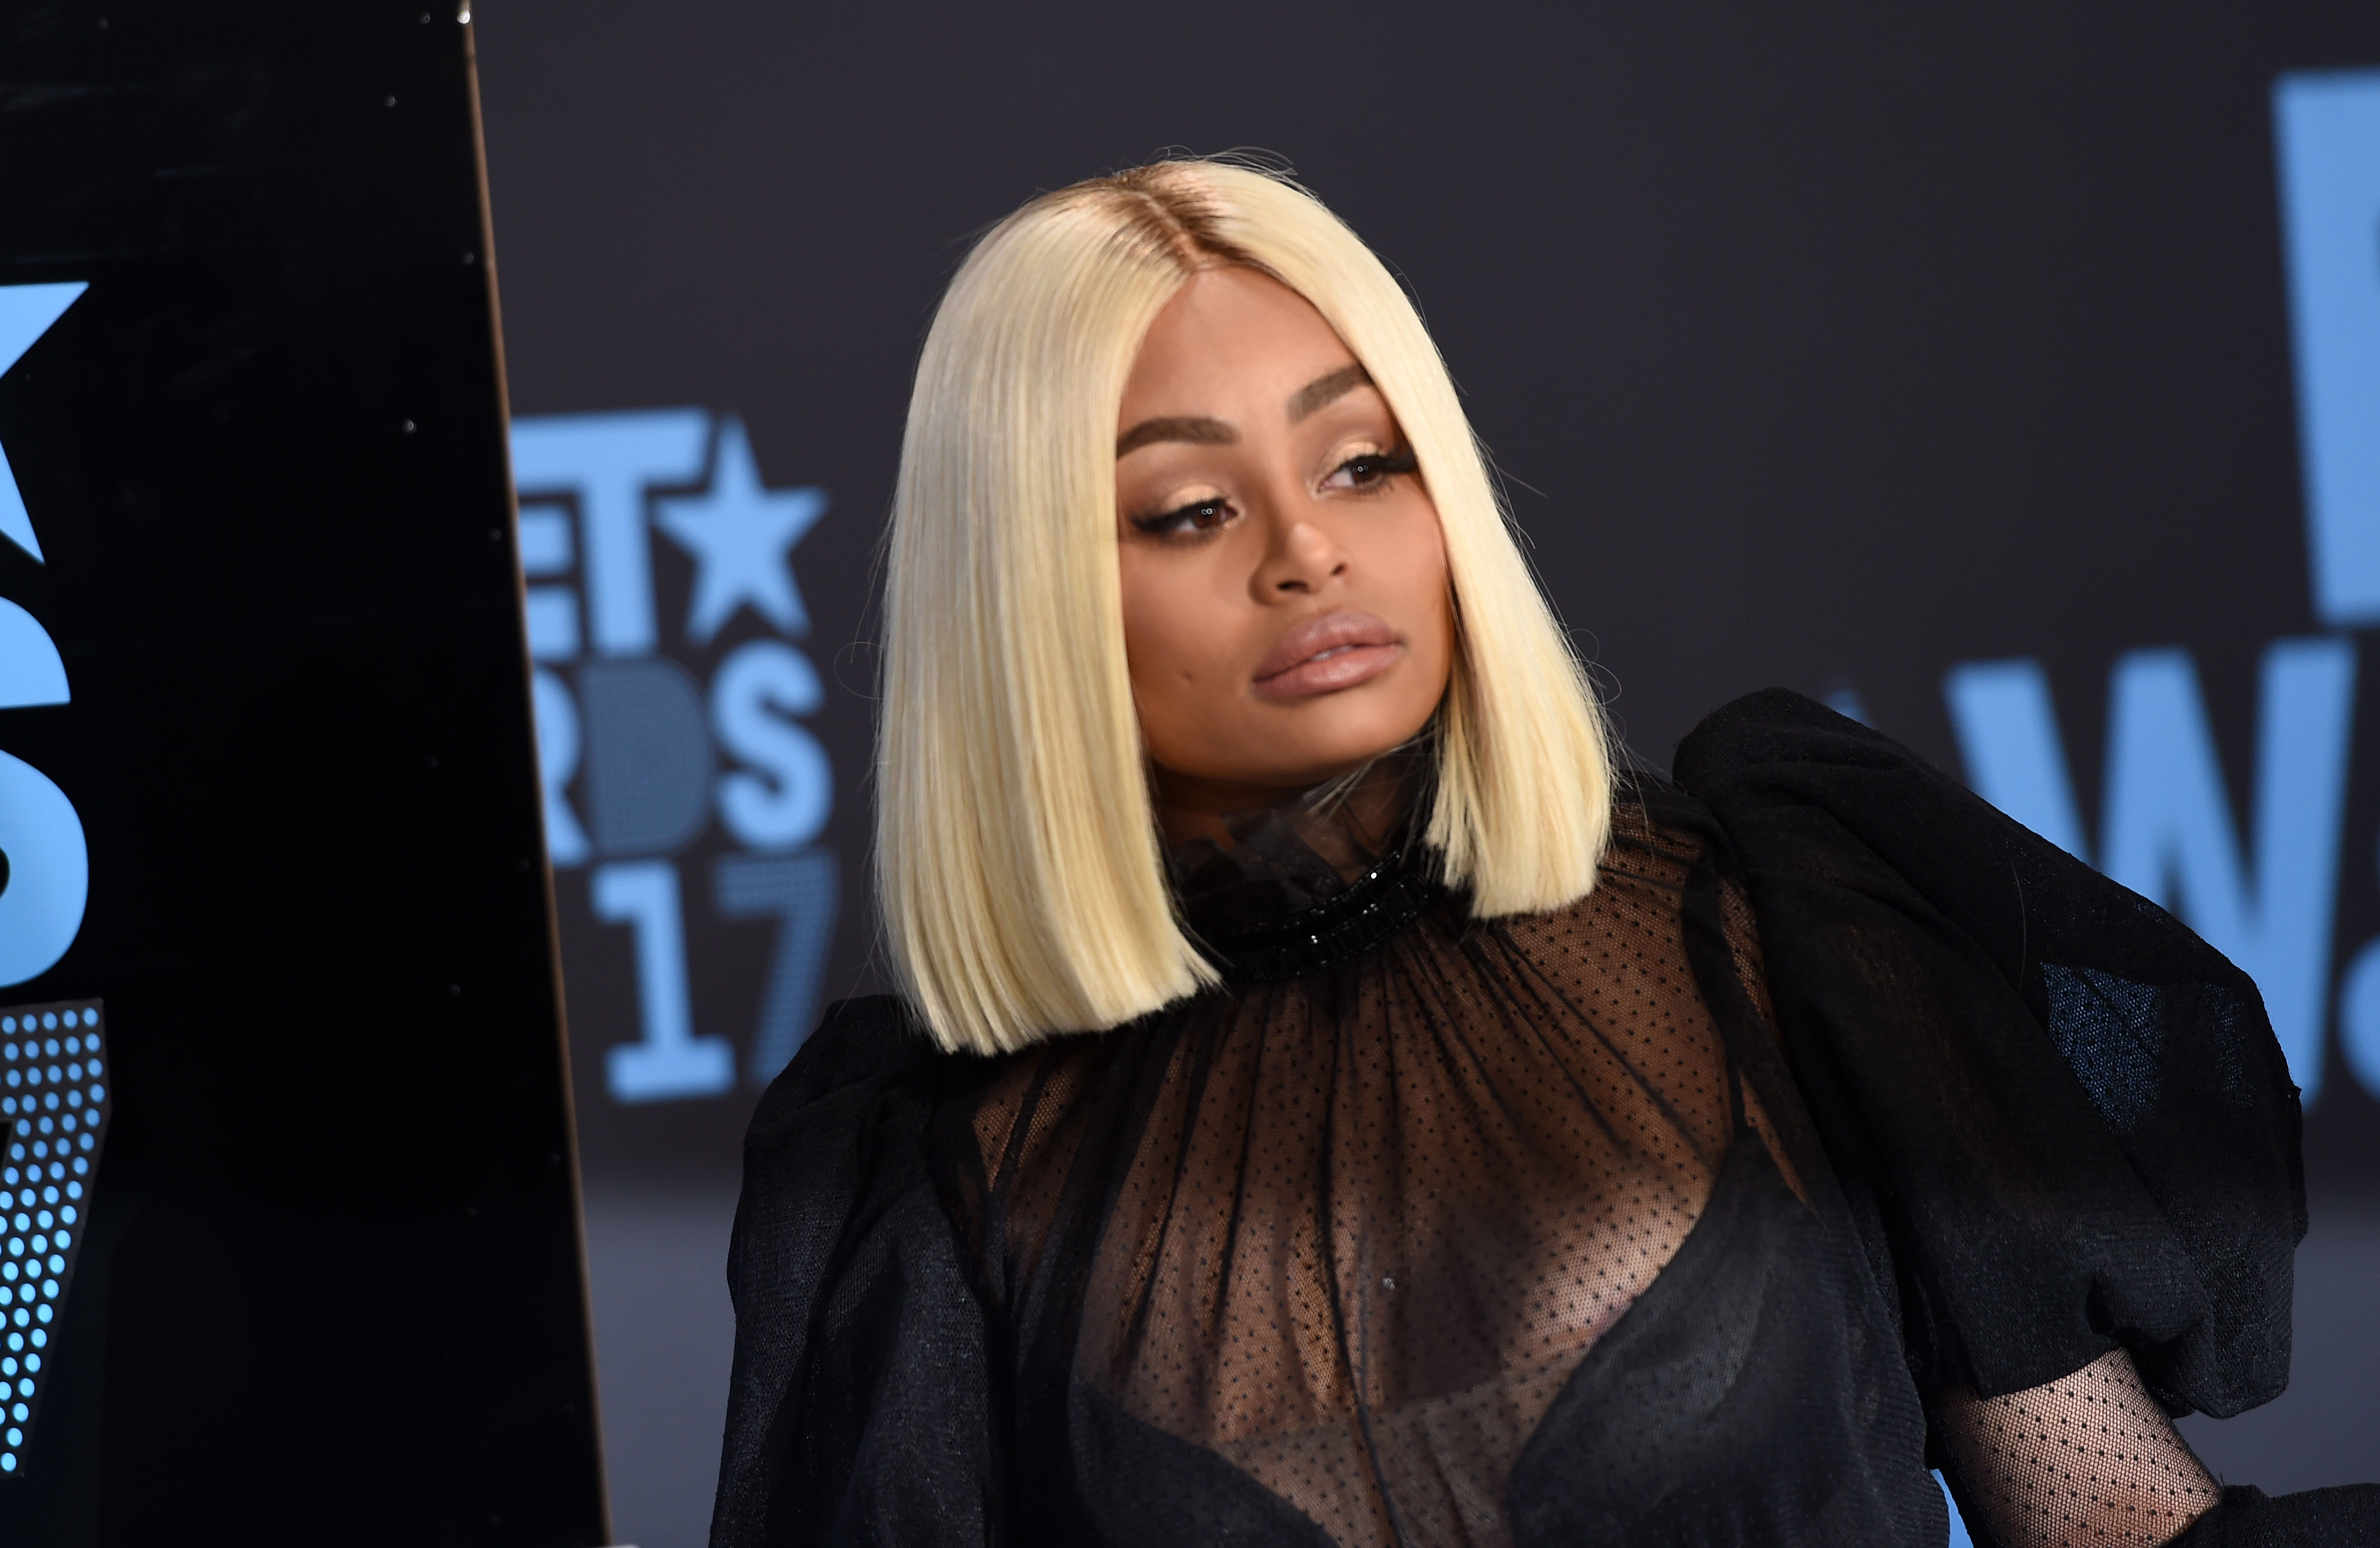 Tv Personality Blac Chyna Attends The Bet Awards On June In Los